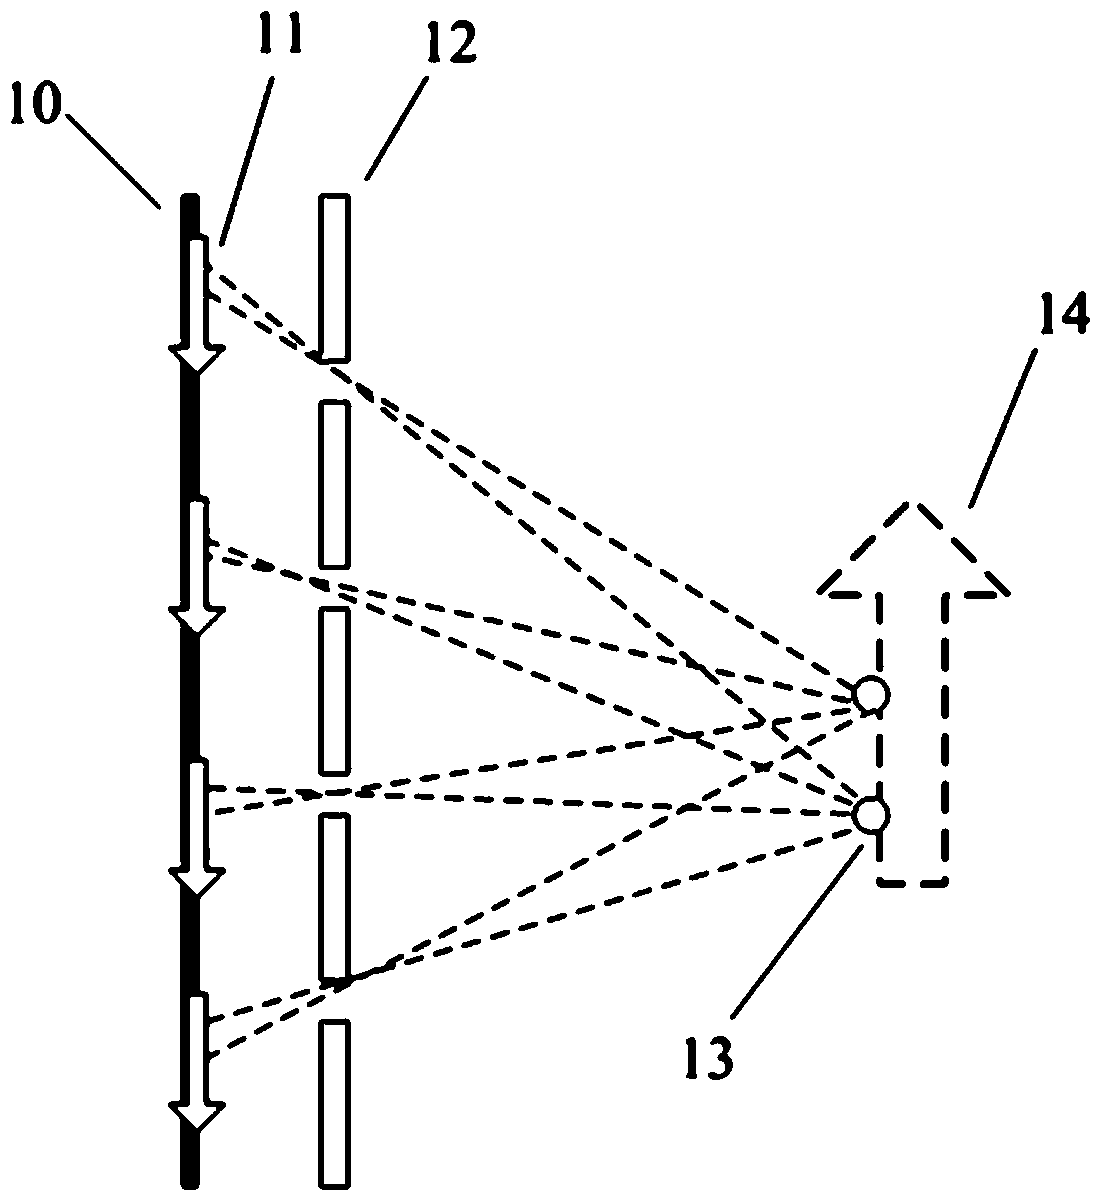 A 2d/3d switchable integrated imaging stereoscopic display device